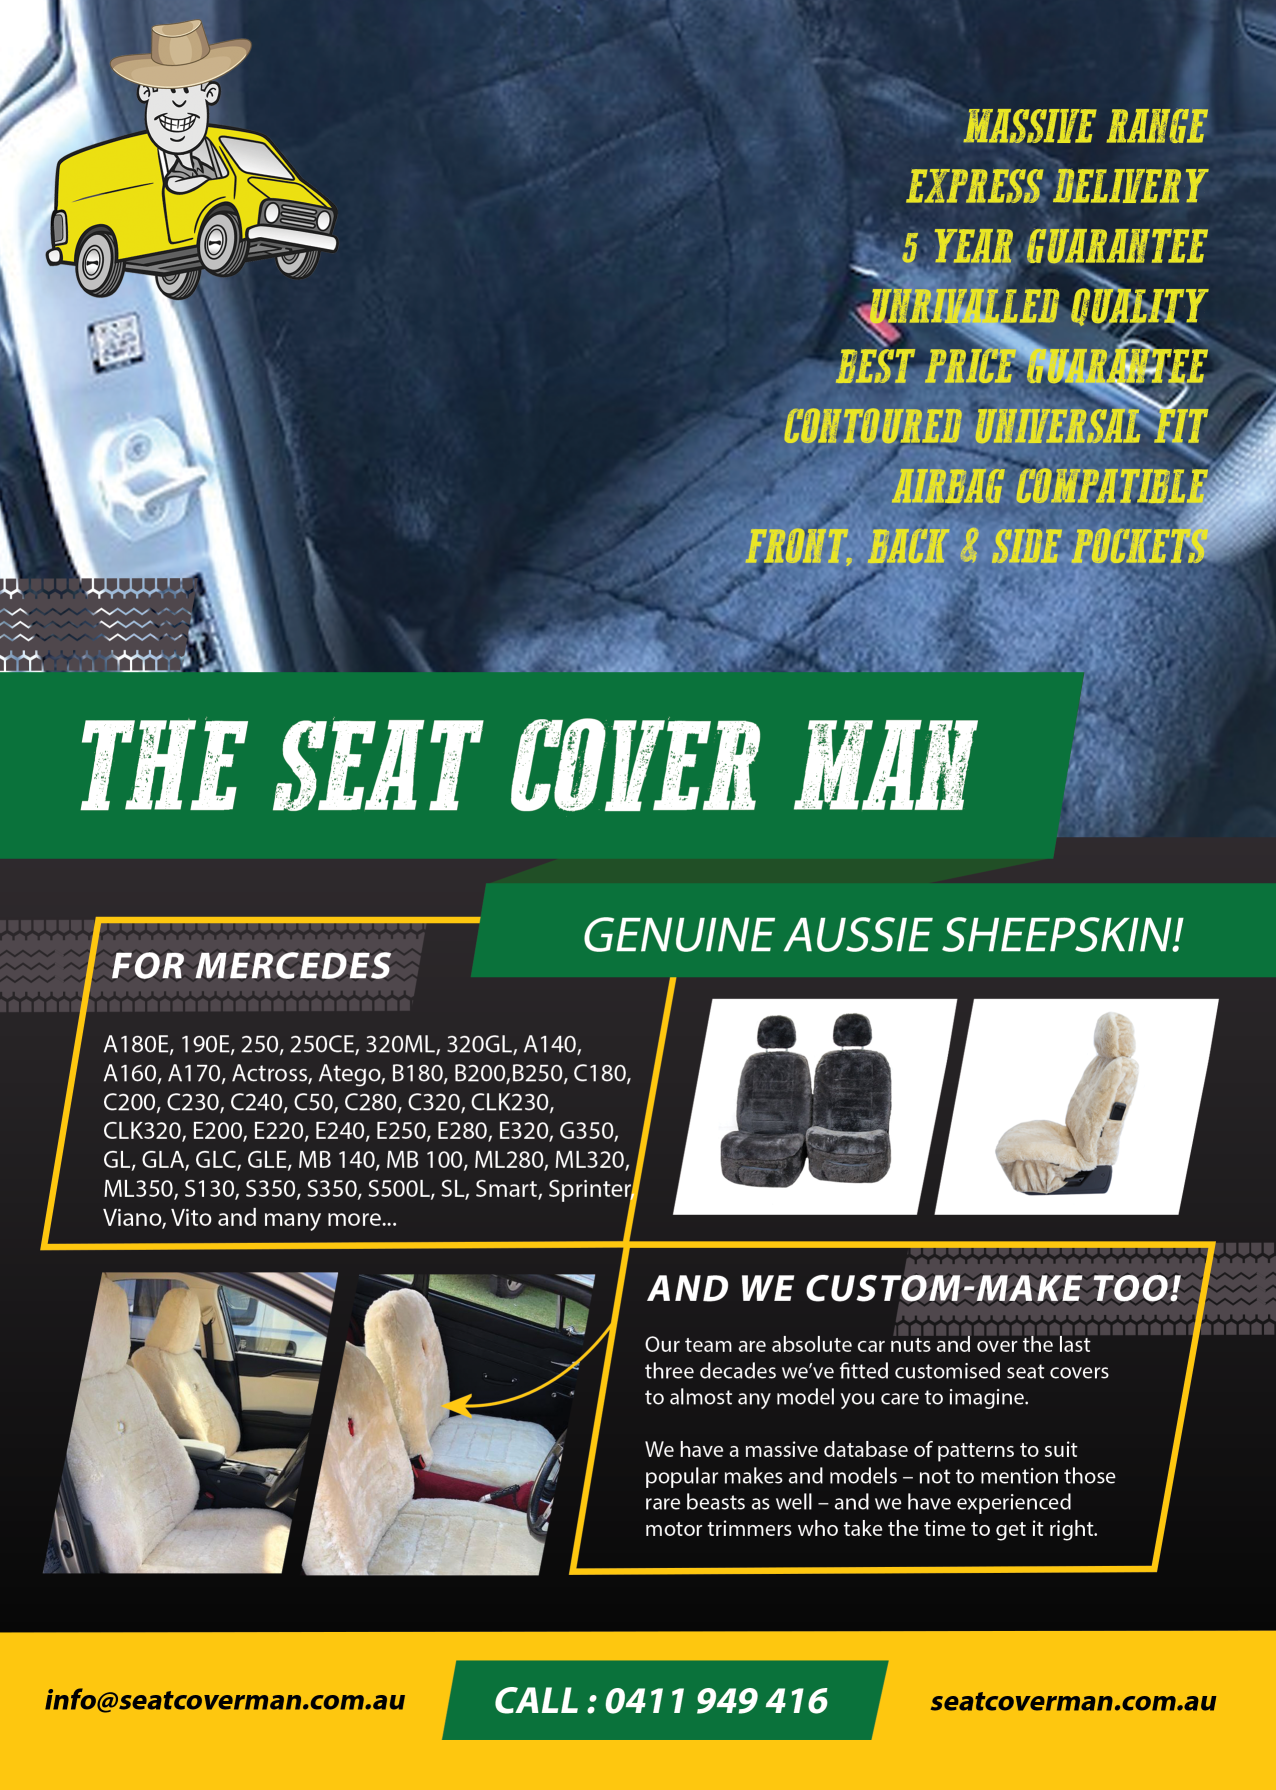 Sheepskin Seat Covers for Mercedes by The Seat Cover Man